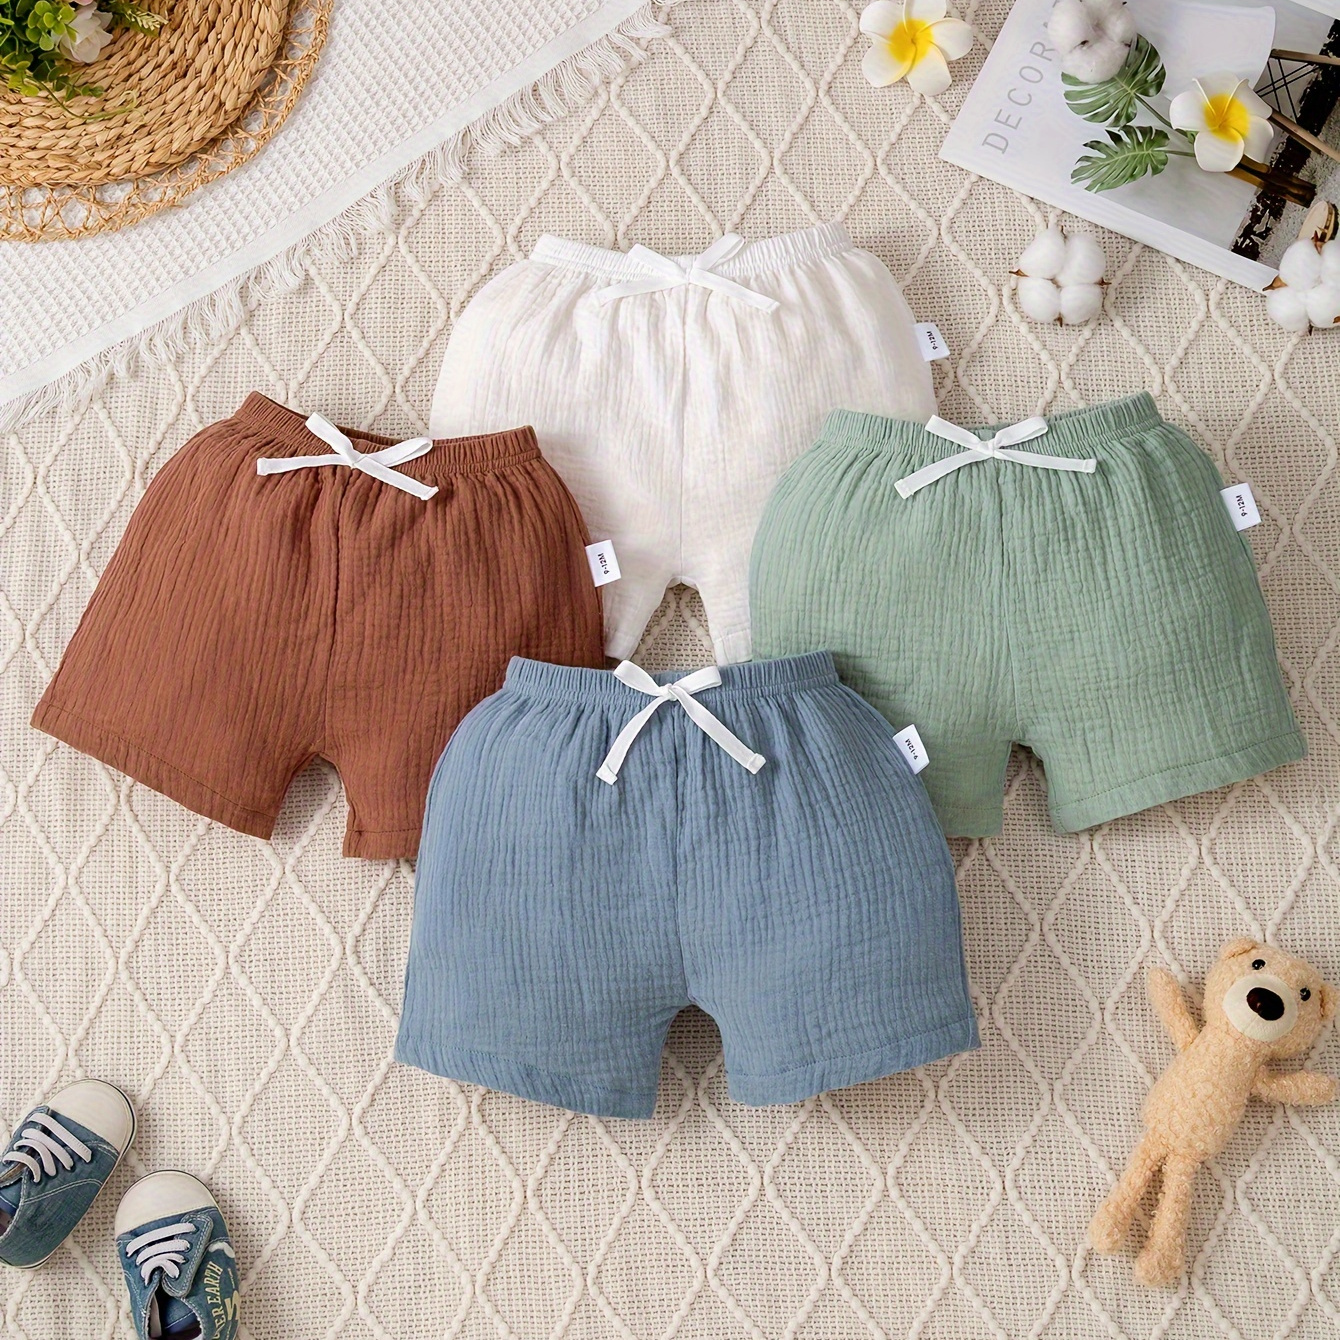 

3-pack Unisex Baby Shorts, 100% Pure Cotton Muslin, Soft And Comfortable, Casual Style Toddler Bloomers With Elastic Waistband, Assorted Colors, Infant Summer Clothing